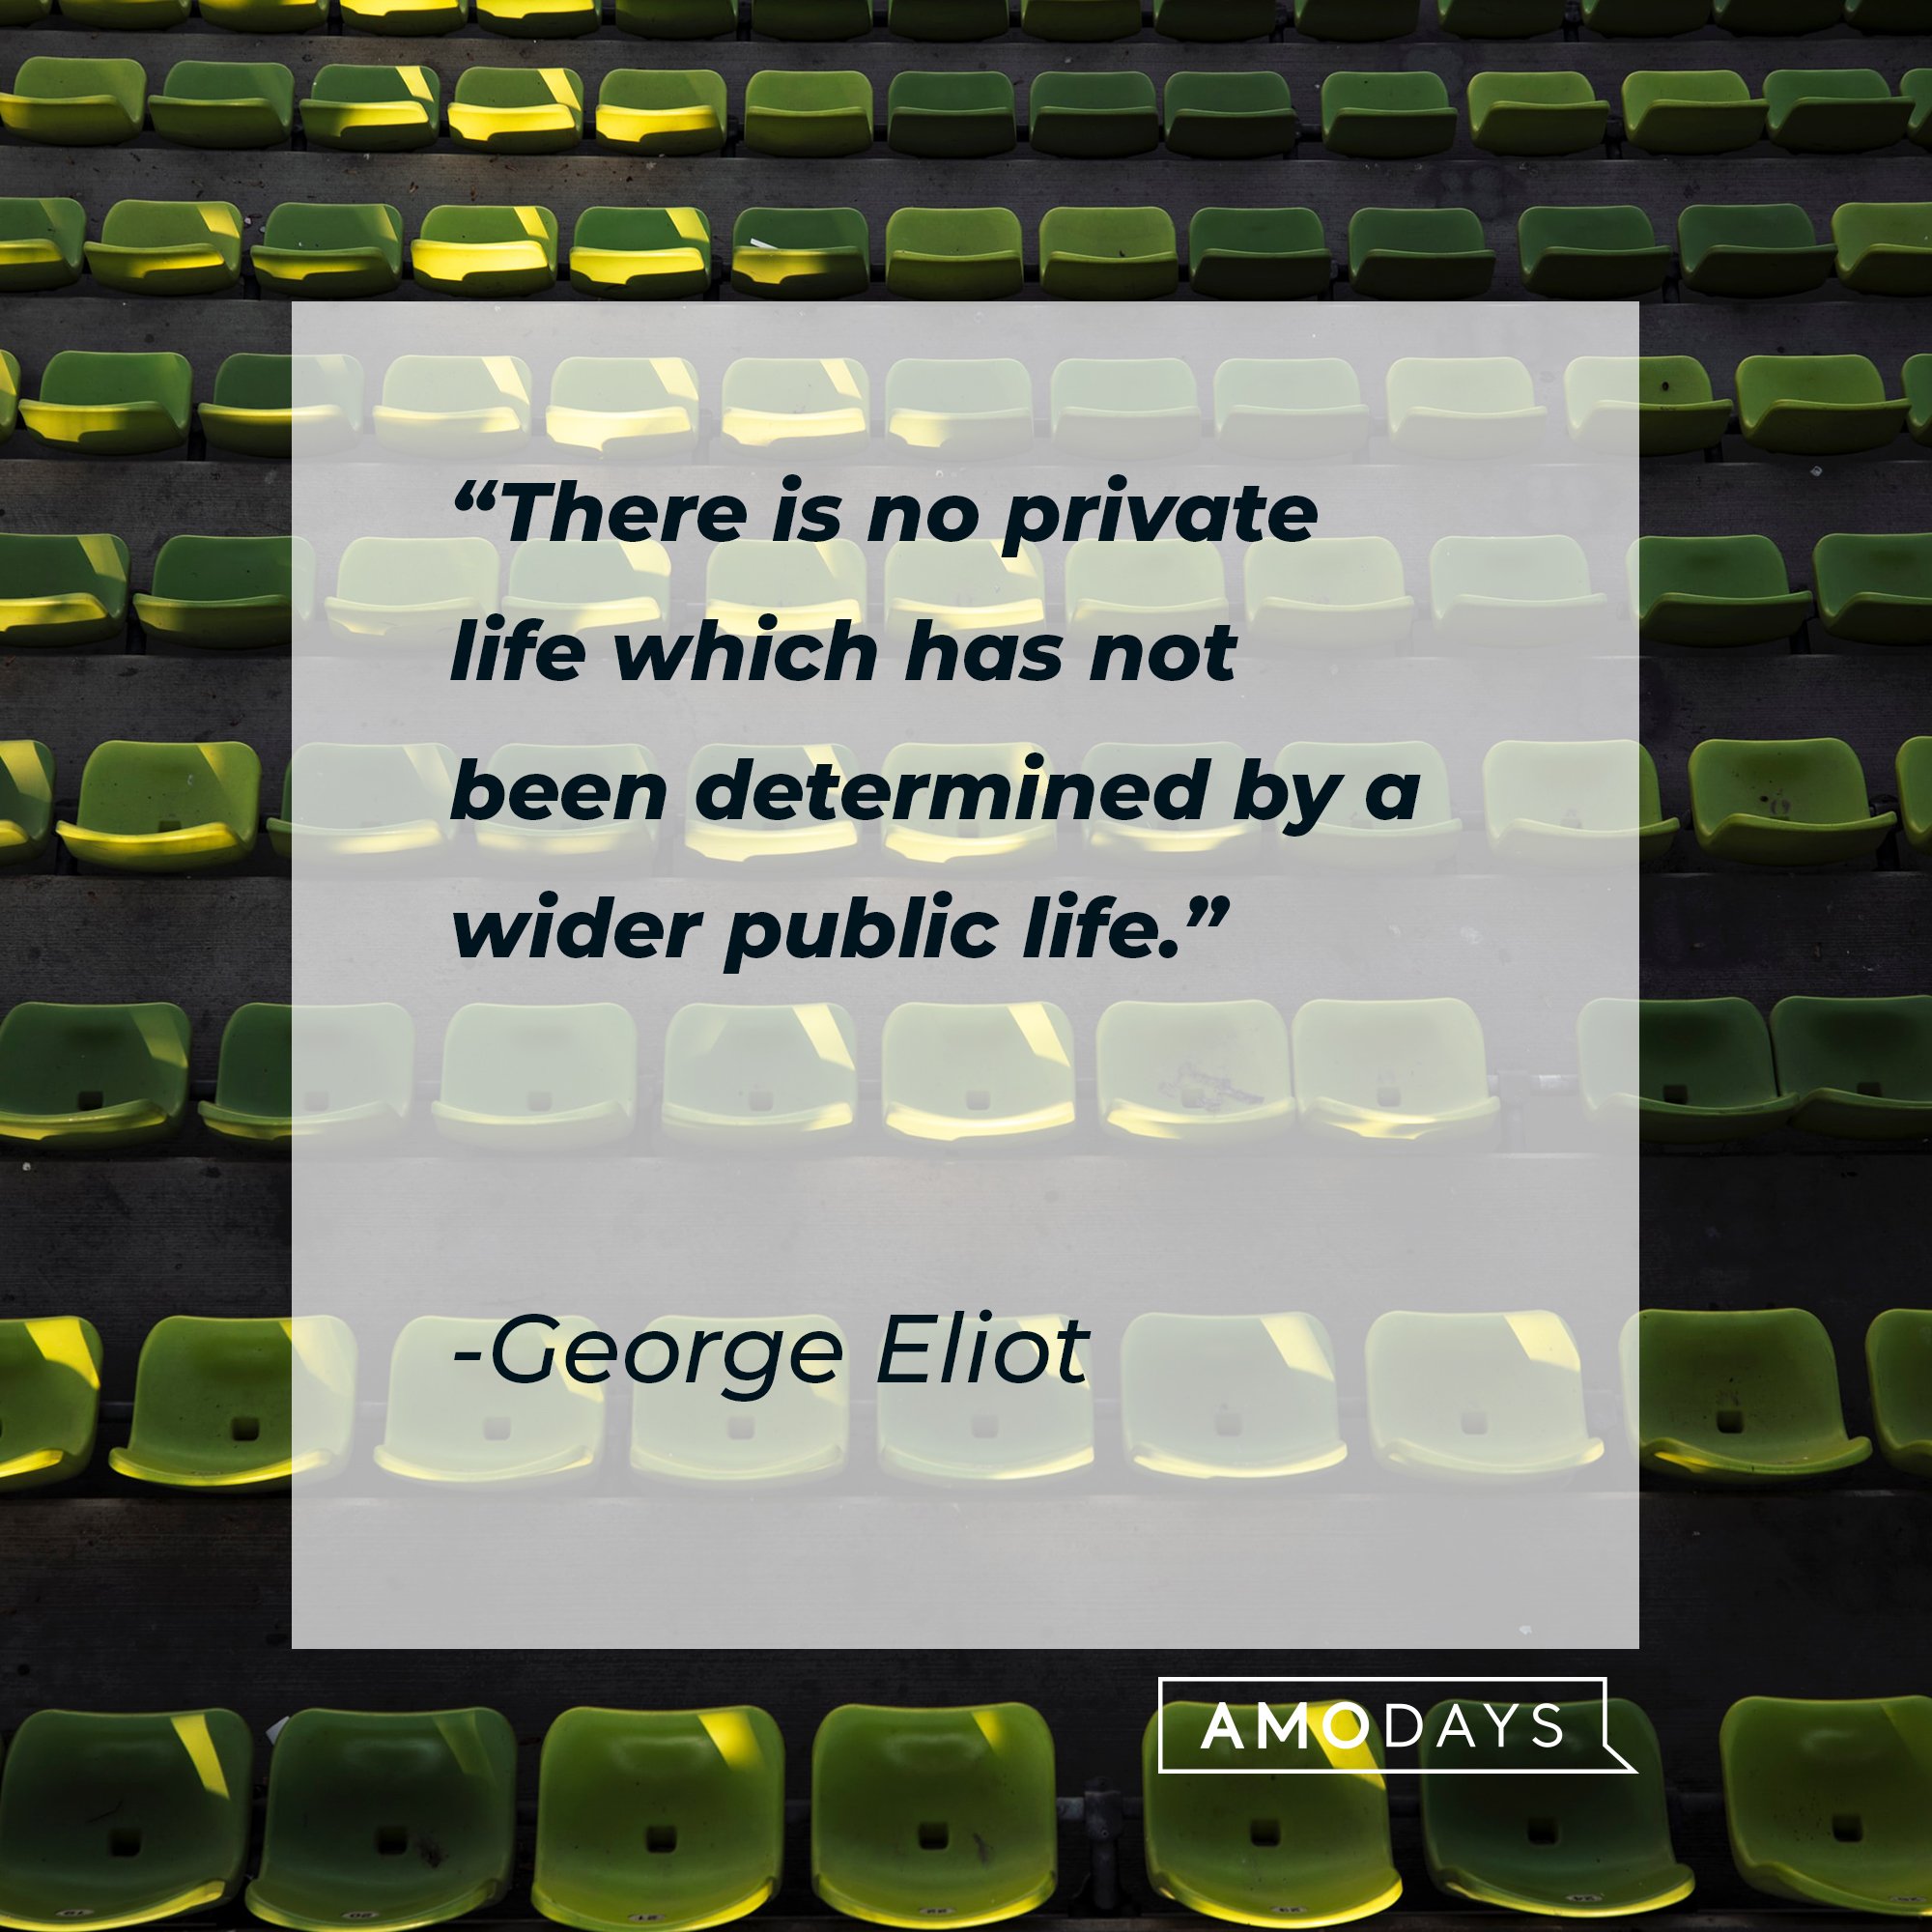 George Eliot’s quote: “There is no private life which has not been determined by a wider public life." | Image: AmoDays   